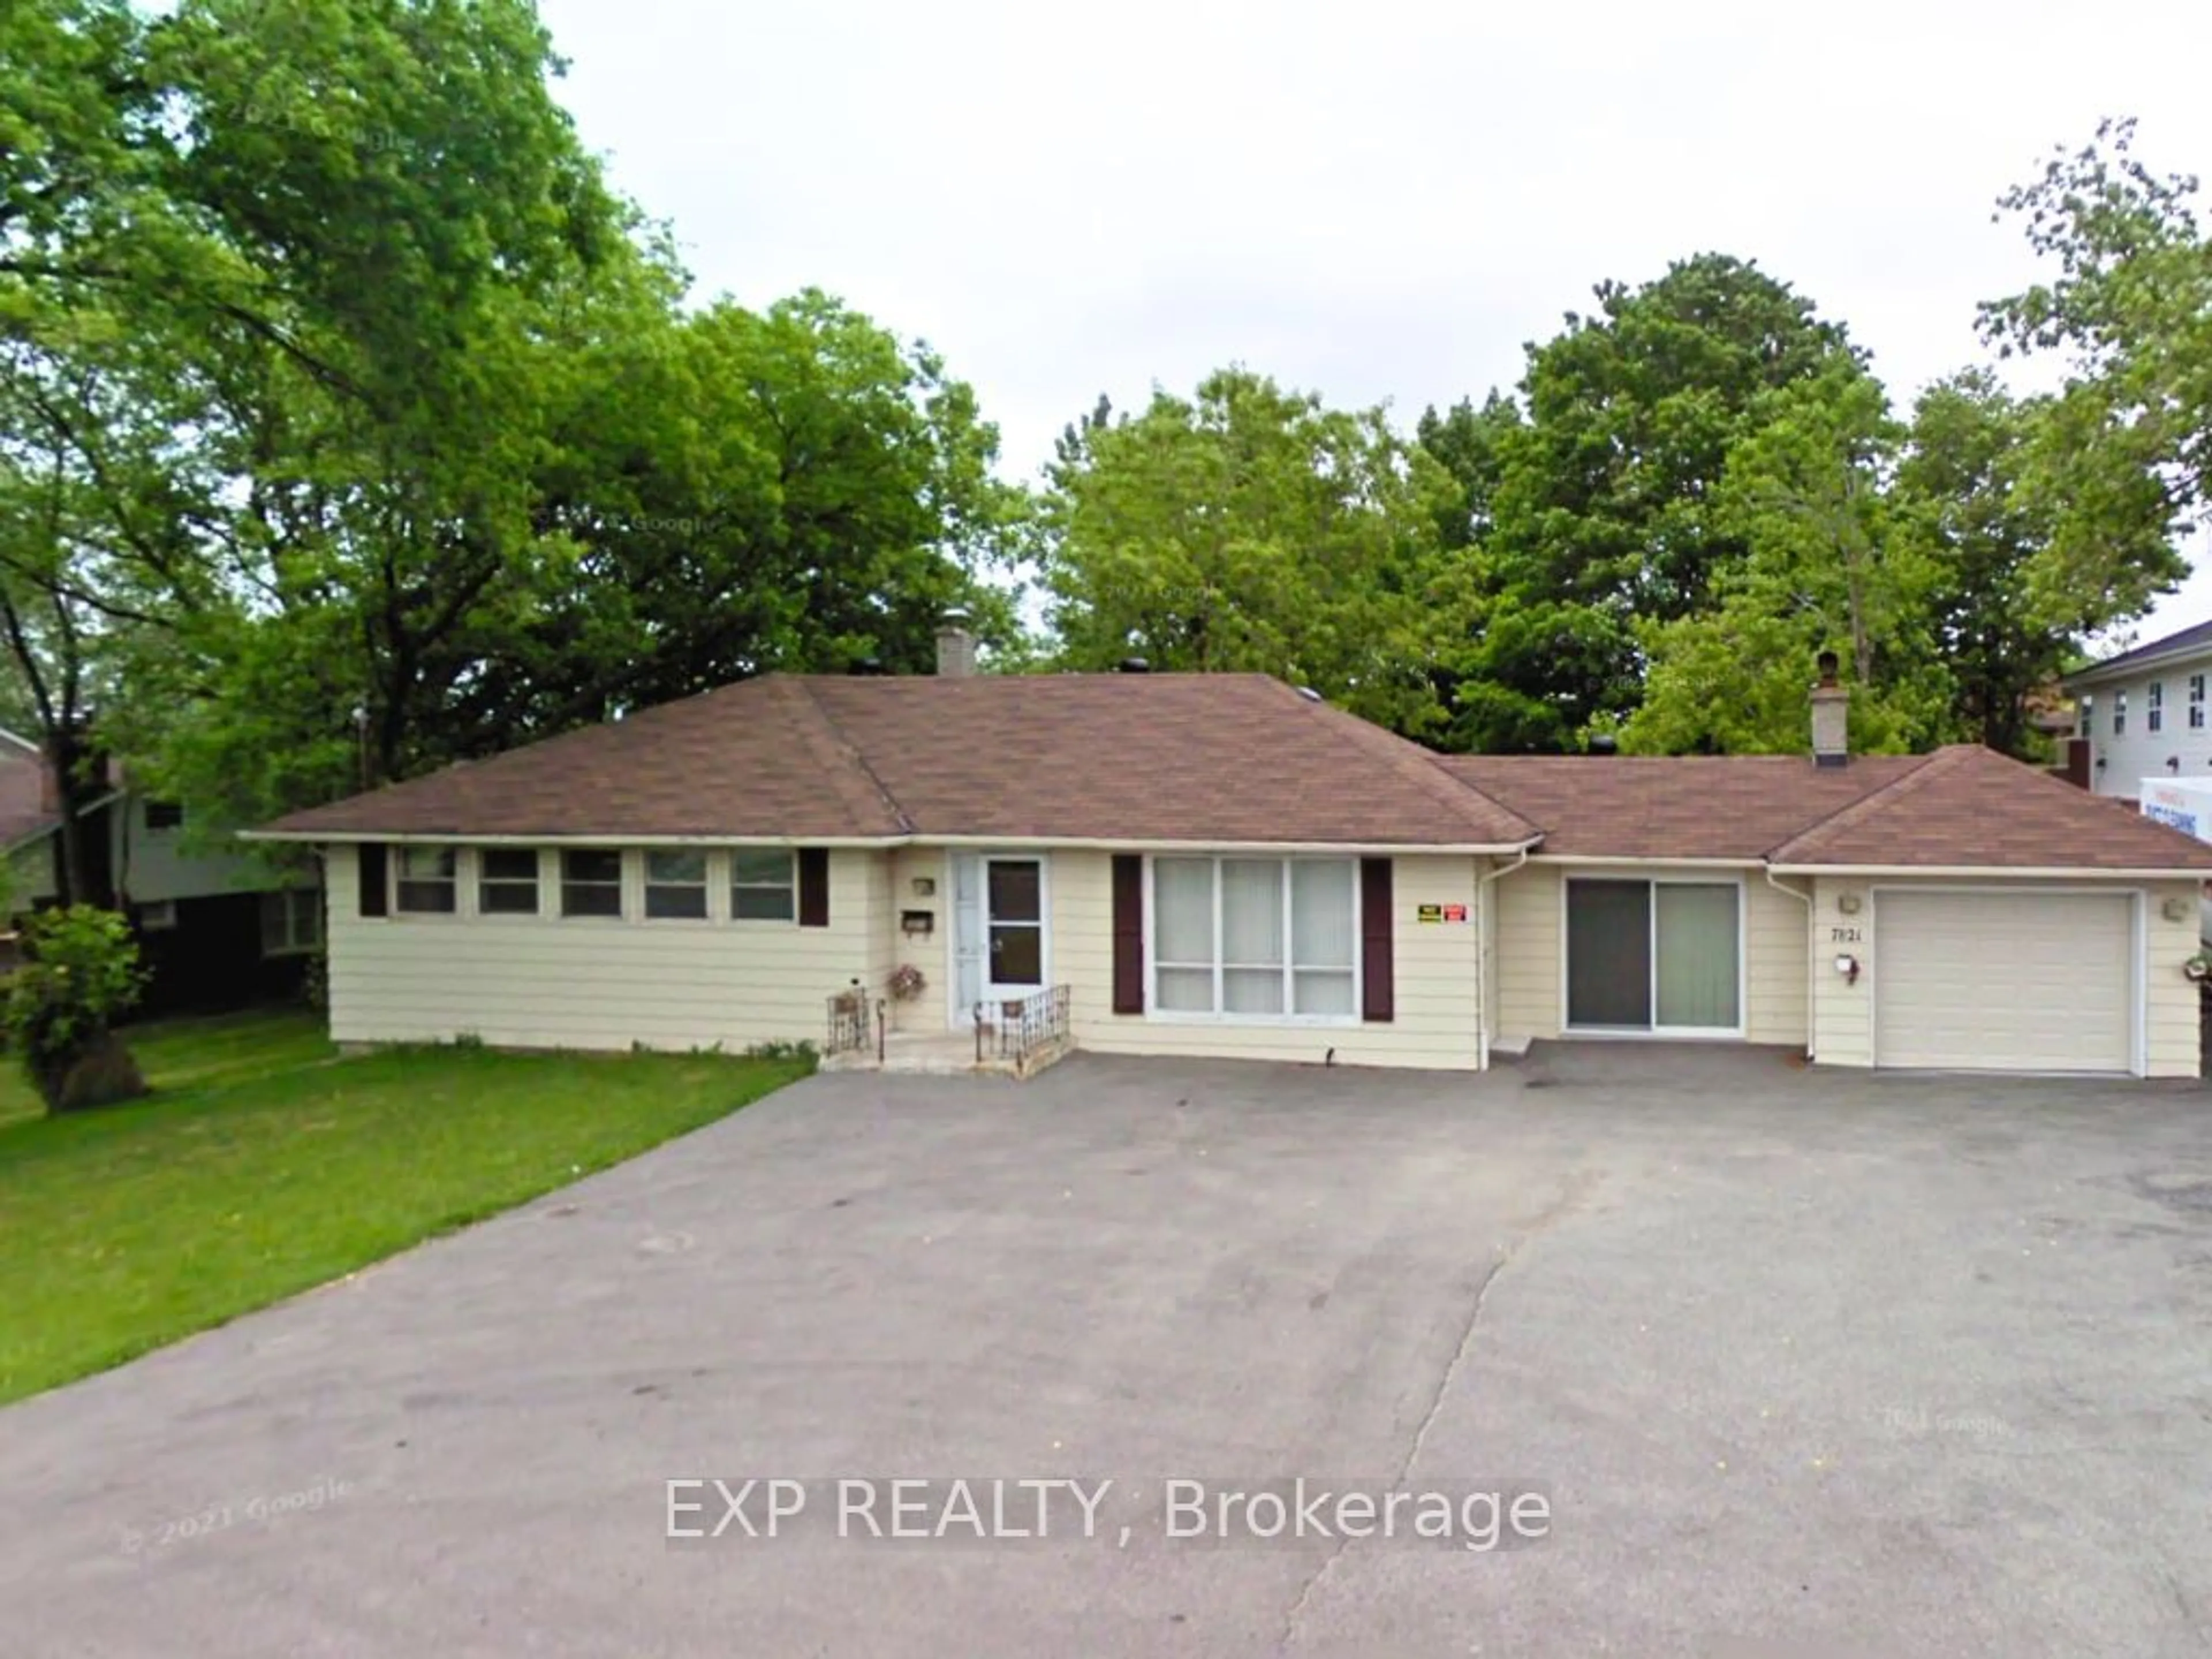 Frontside or backside of a home for 7821 Kennedy Rd, Markham Ontario L3R 2C8